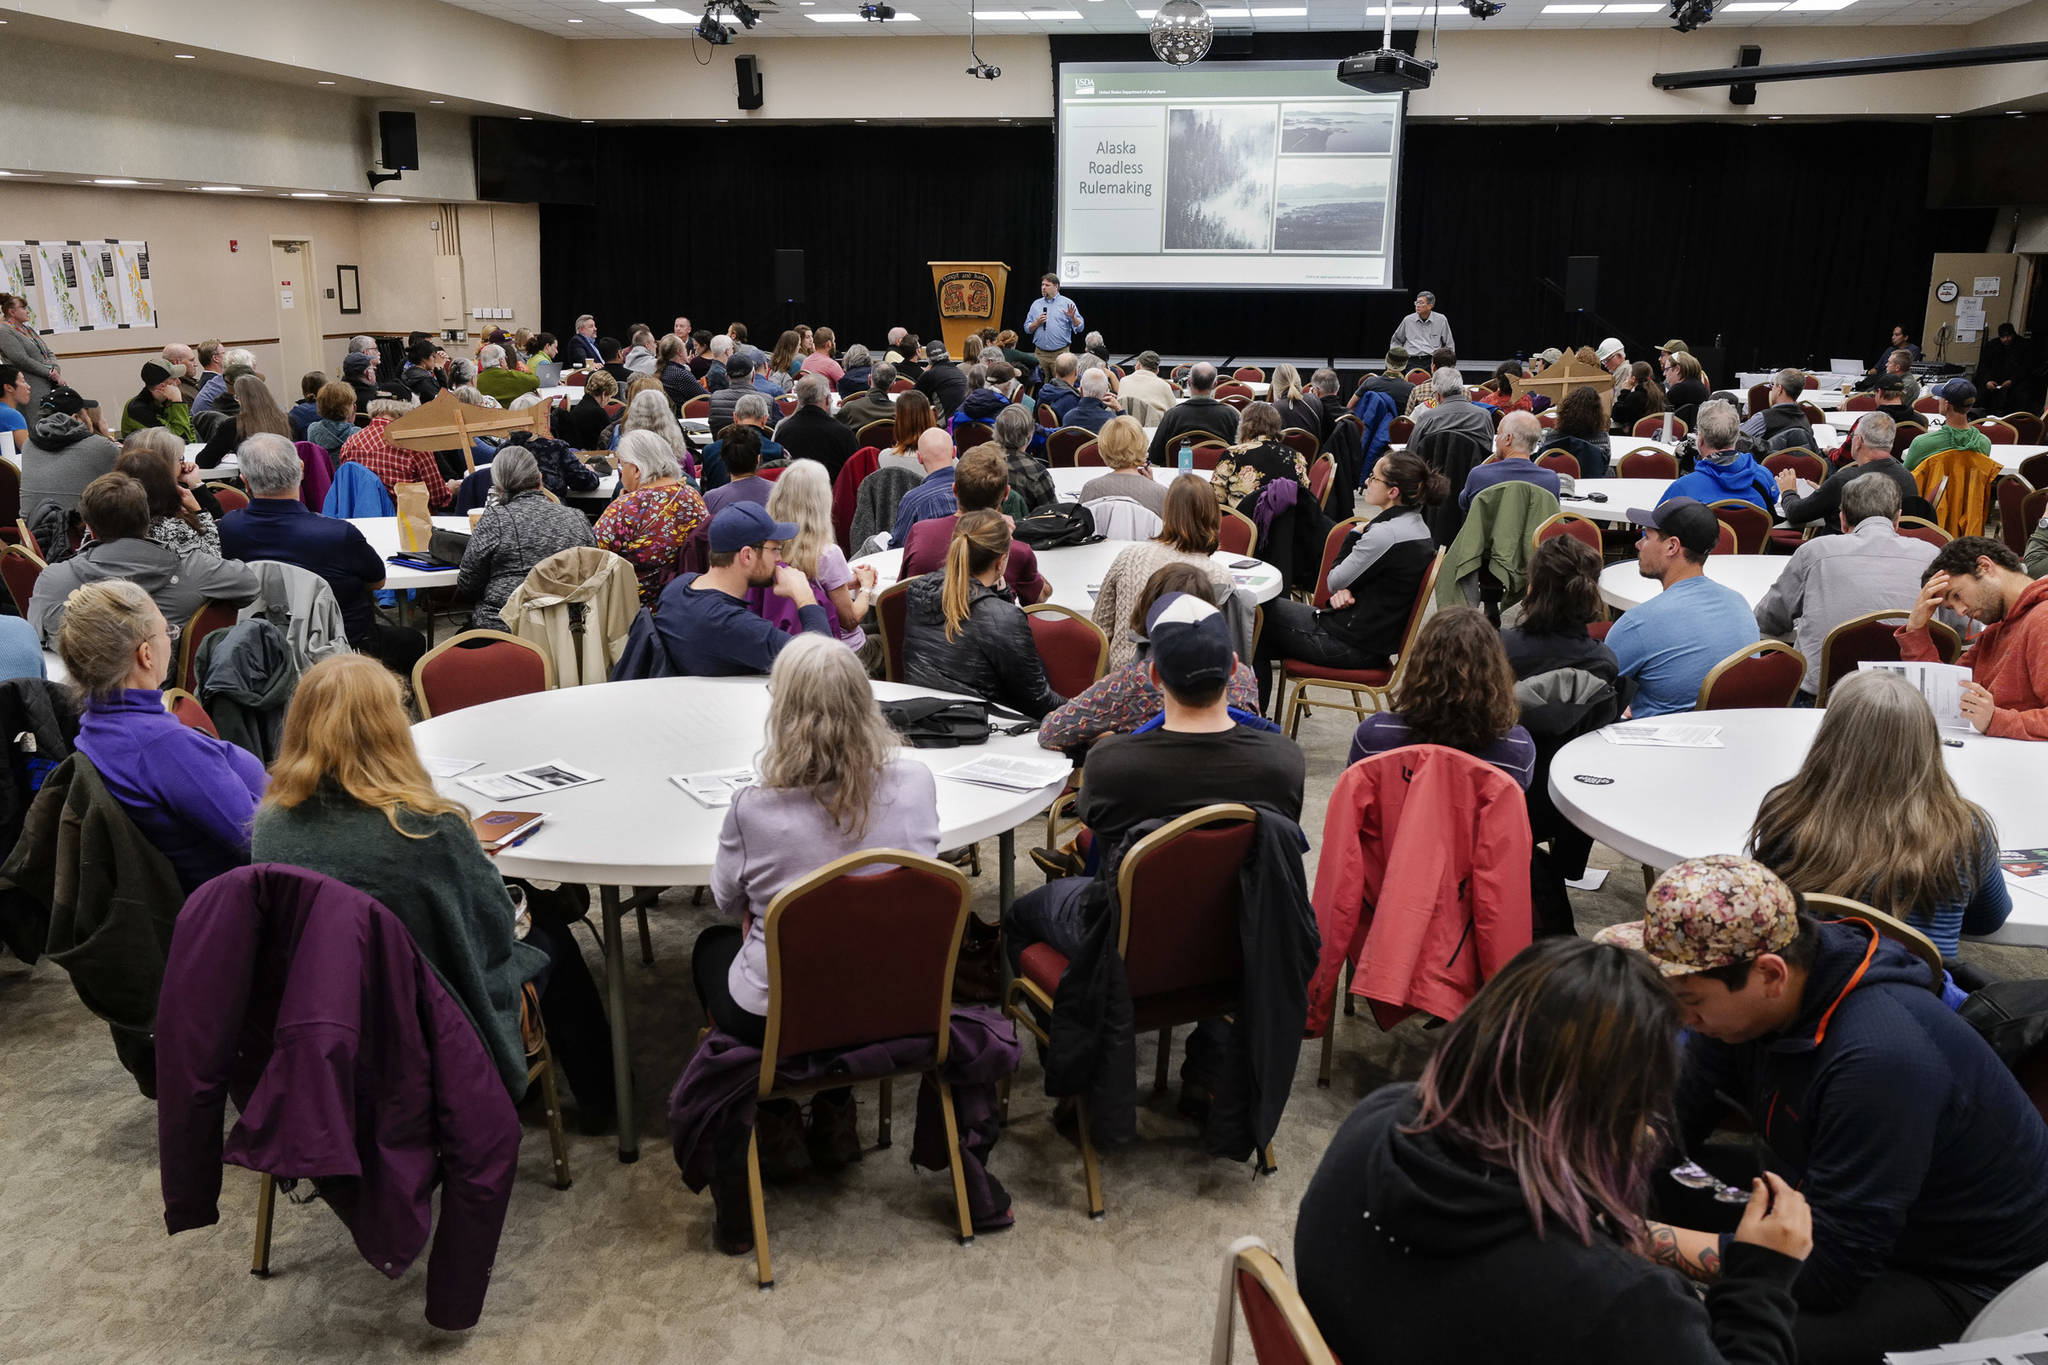 Juneau residents listen to a U.S. Department of Agriculture Forest Service informational meeting on the Rulemaking for Alaska Roadless Areas Draft Environmental Impact Statement at Elizabeth Peratrovich Hall on Monday, Nov. 4, 2019. (Michael Penn | Juneau Empire)